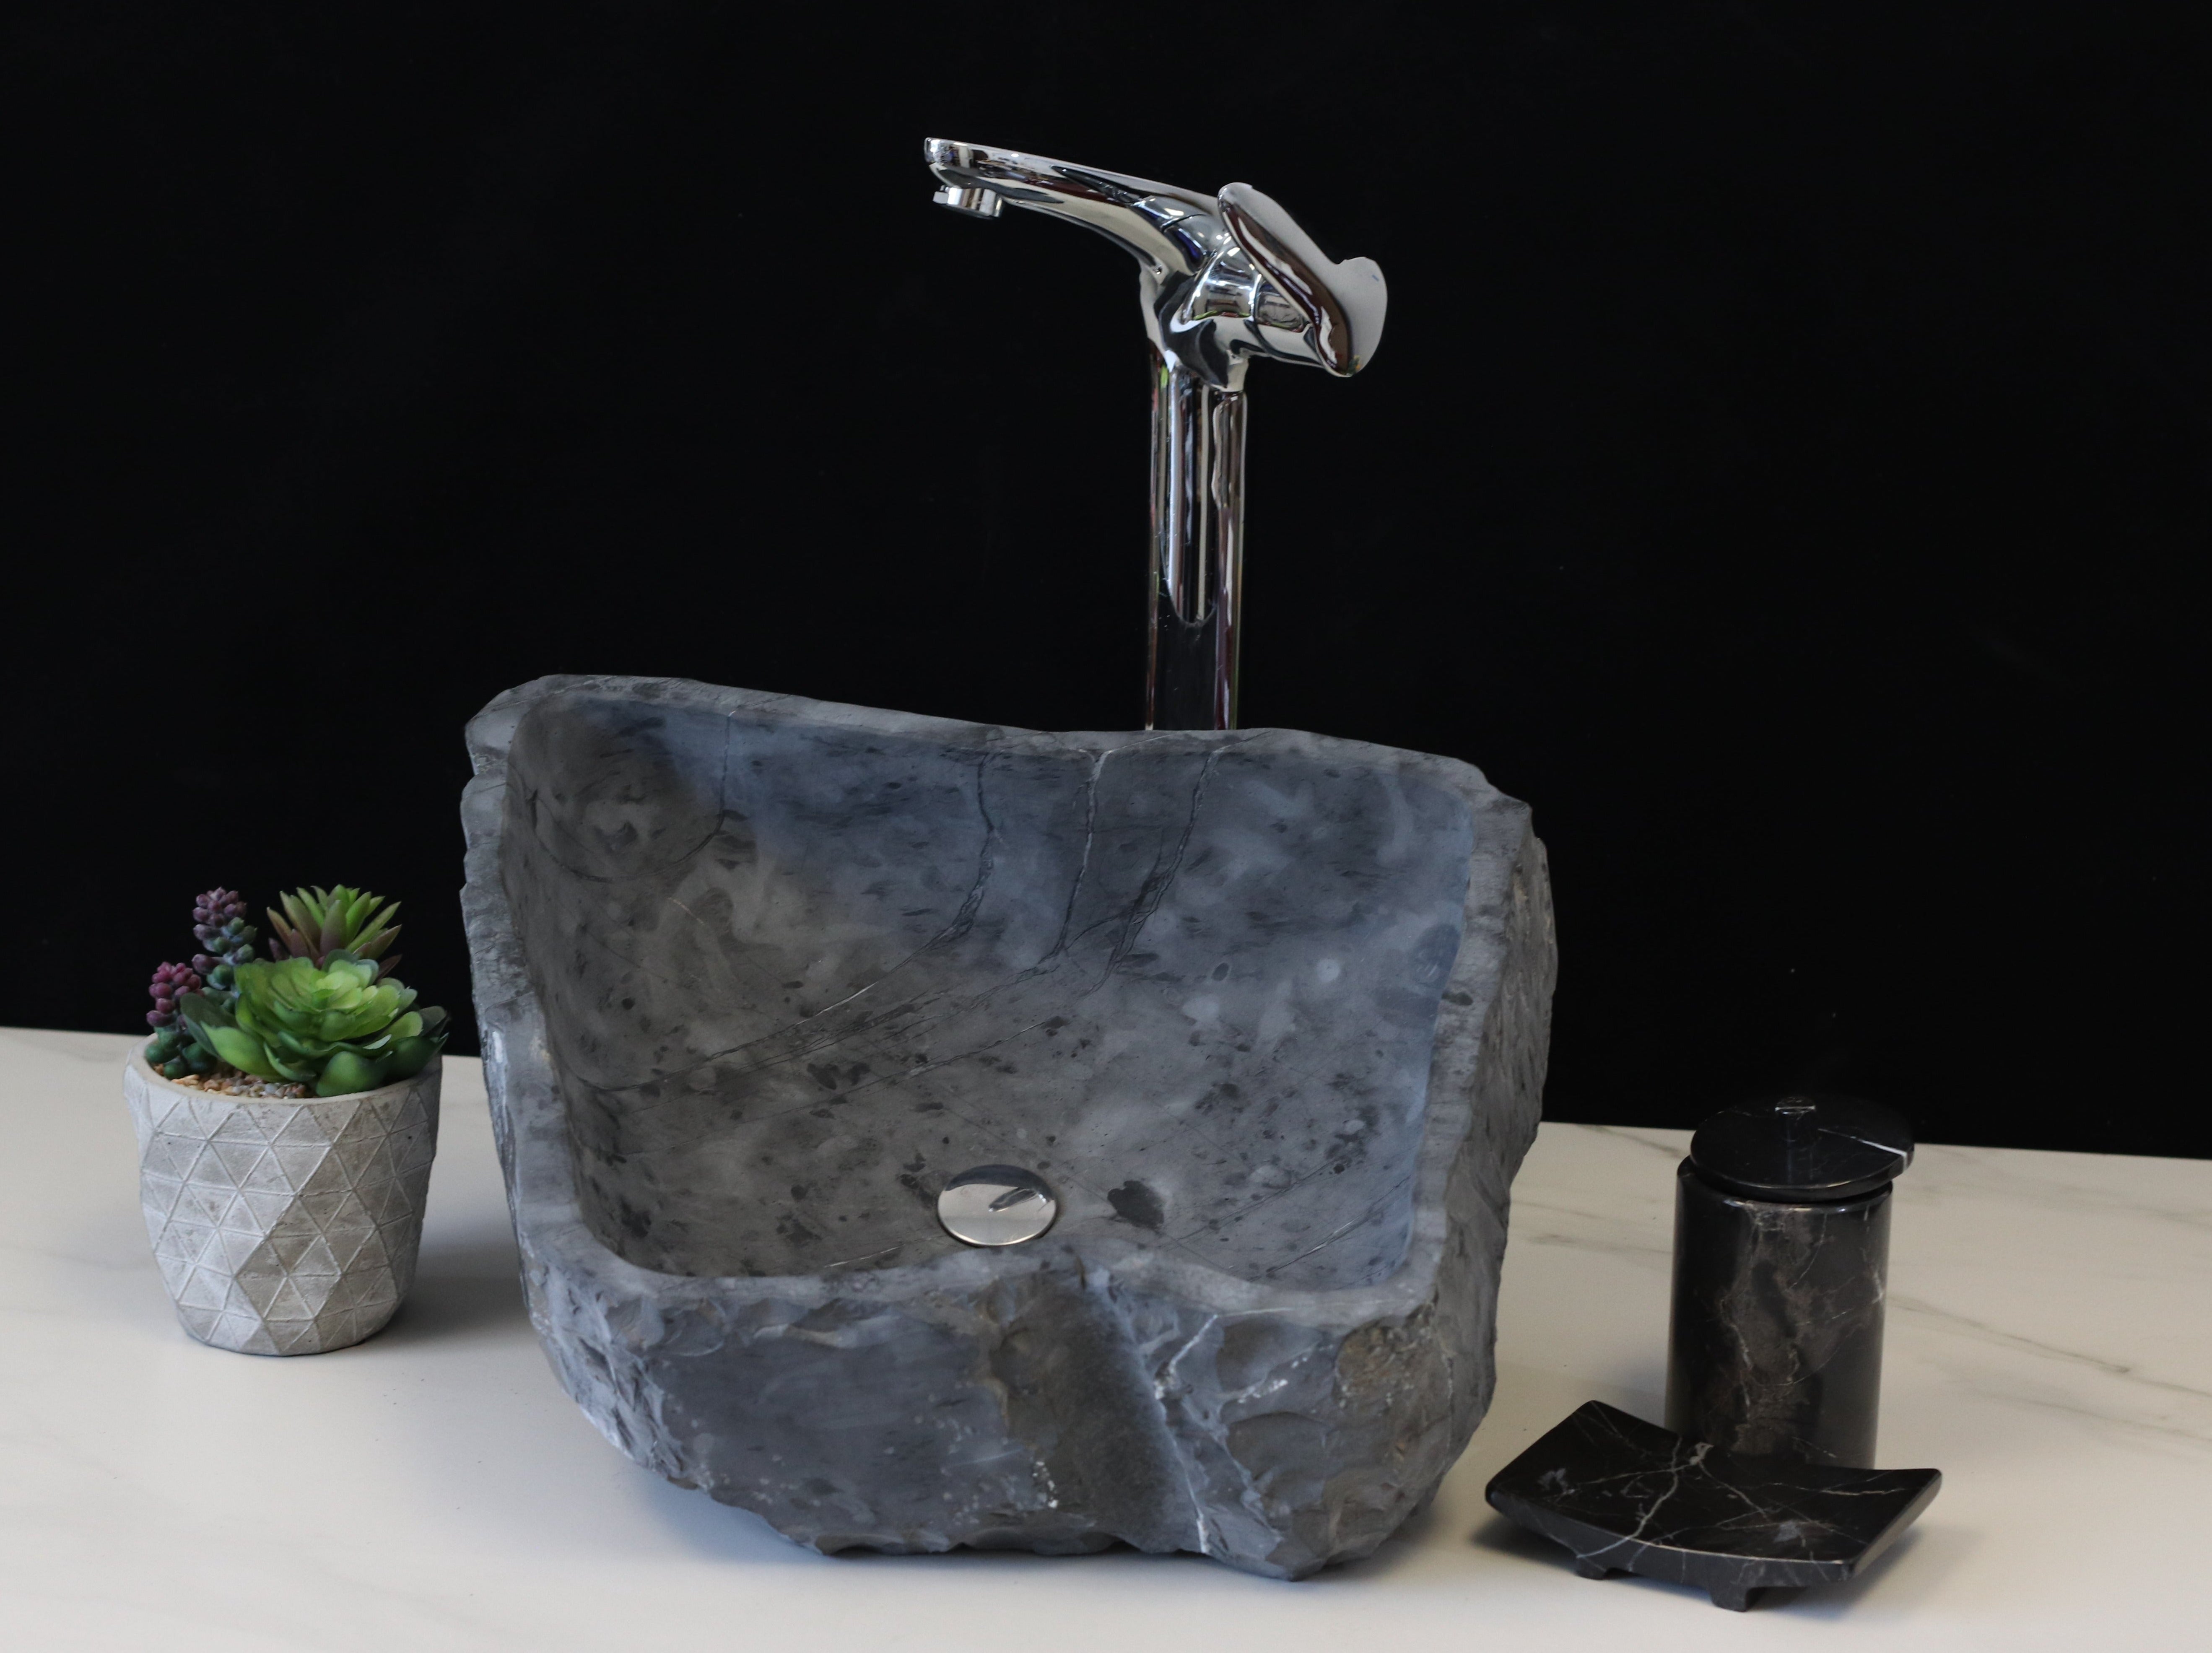 Black and Gray Onyx Stone  Bathroom Vessel Sink. Epoxy Sealant is available with fast shipping. Standard drain size. A beautiful work of rustic art. Handmade. Buy Now at www.felipeandgrace.com